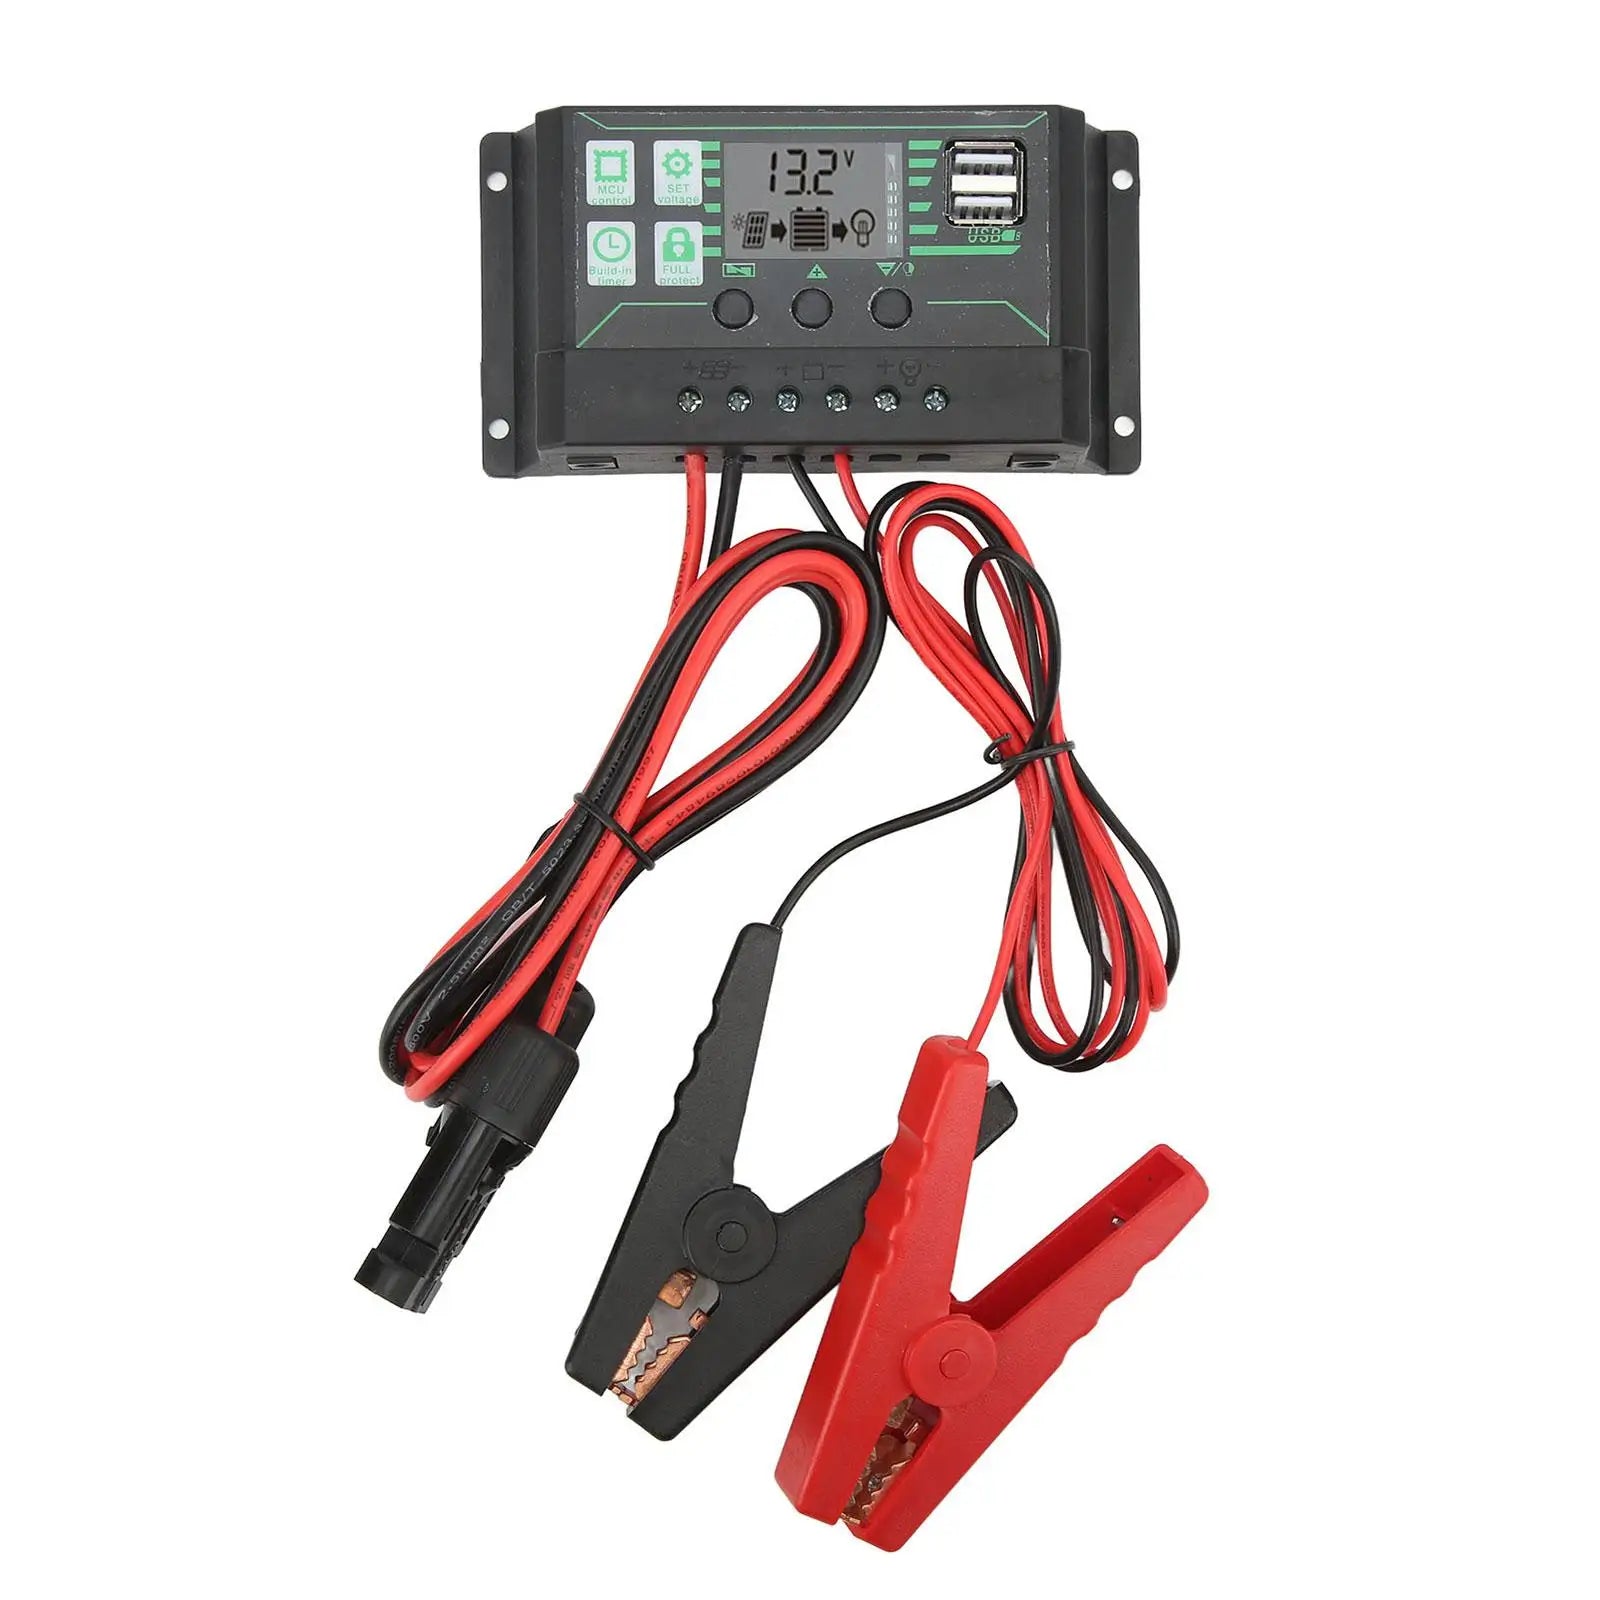 MPPT 10/20/30/60/100A Solar Charge Controller, Solar charge controller with wide LCD screen, suitable for 12/24V panels and regulating battery charging.